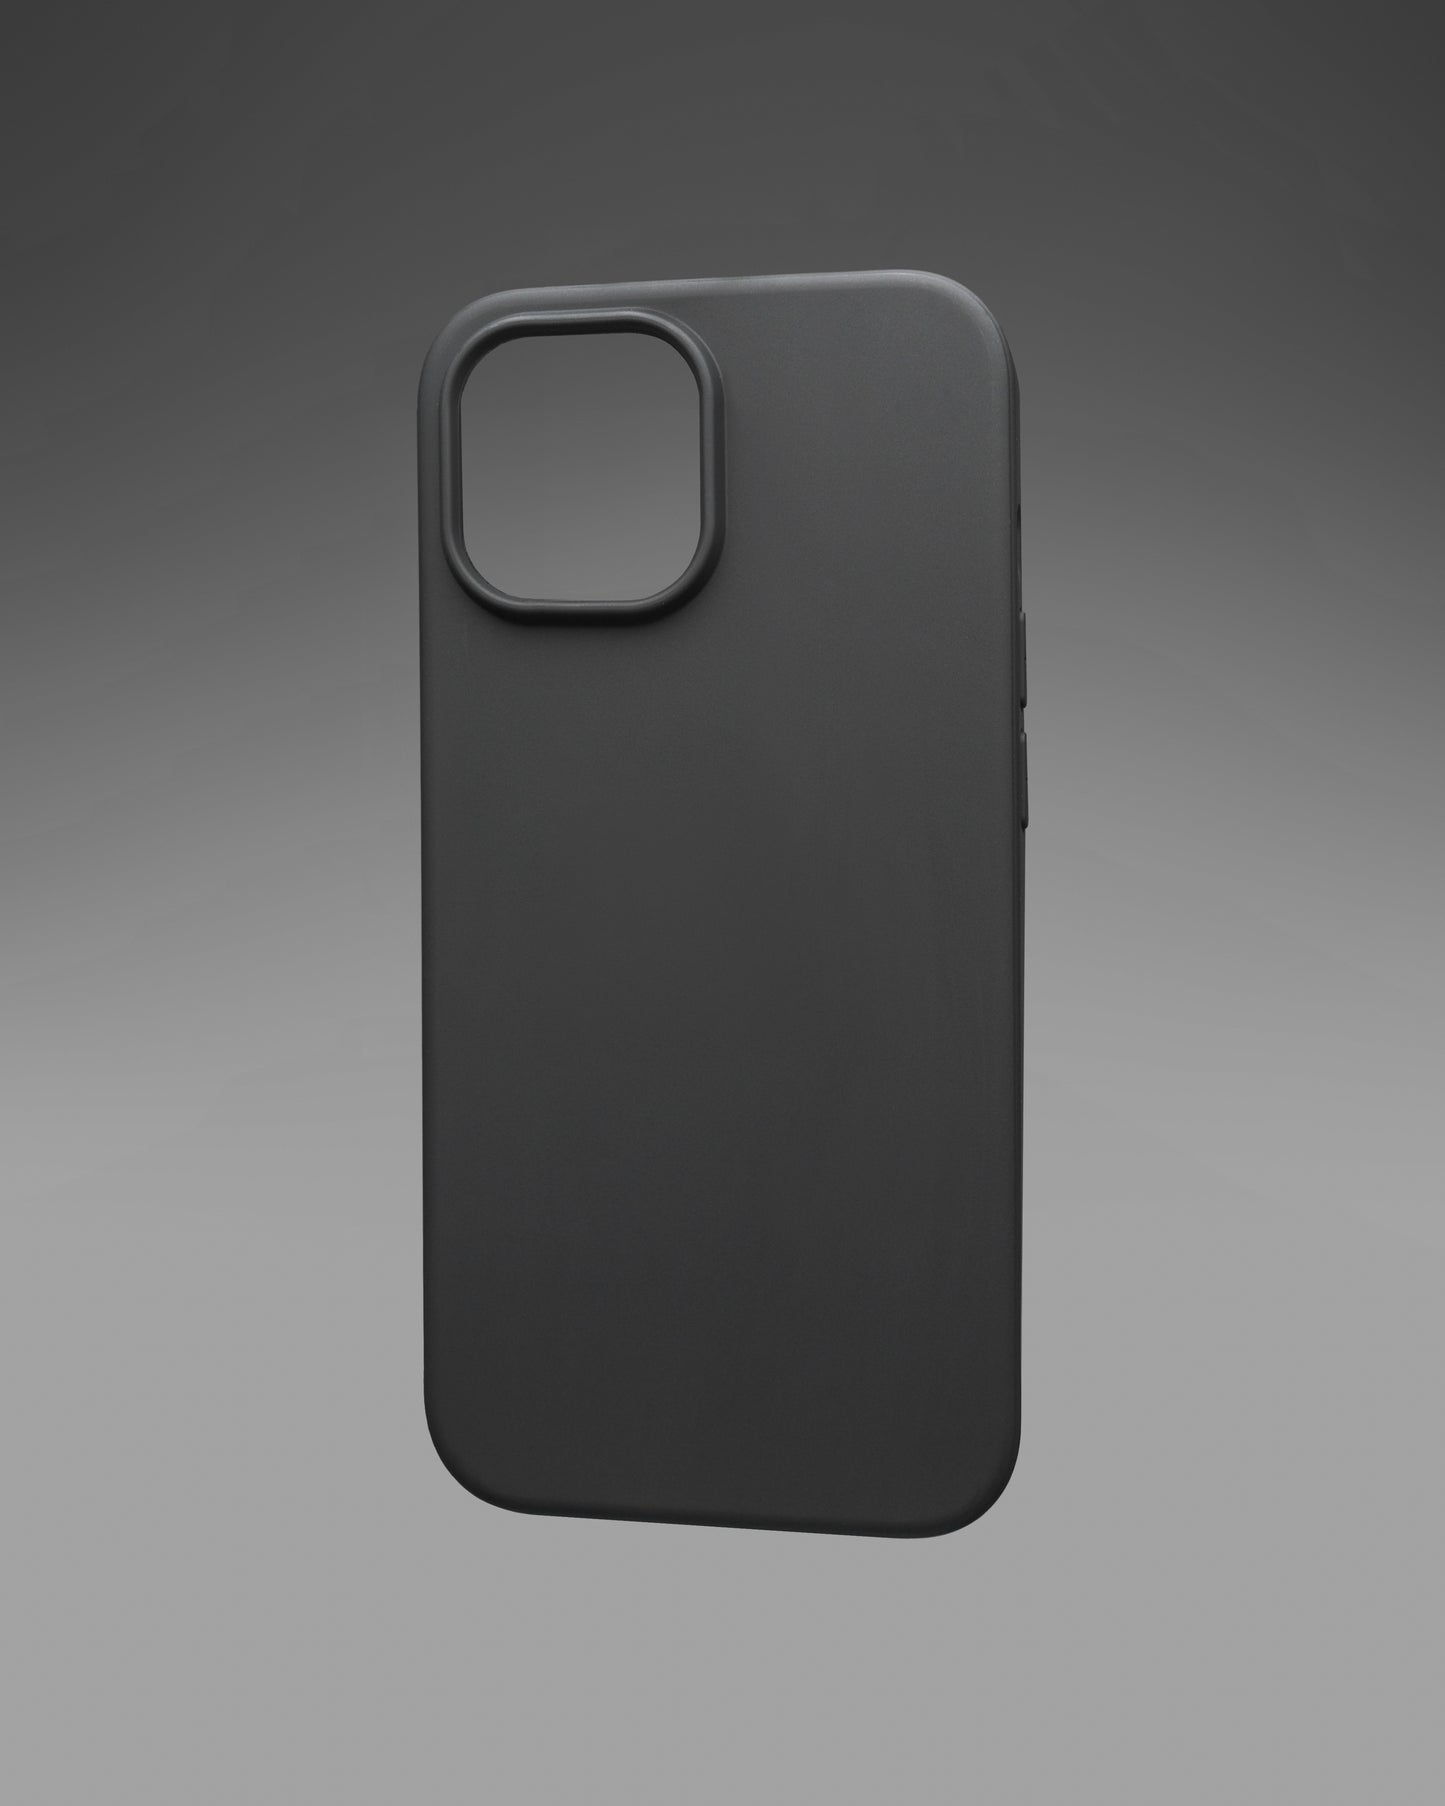 UltraThin + Magnetic / pack of 2 cases / for iPhone 14